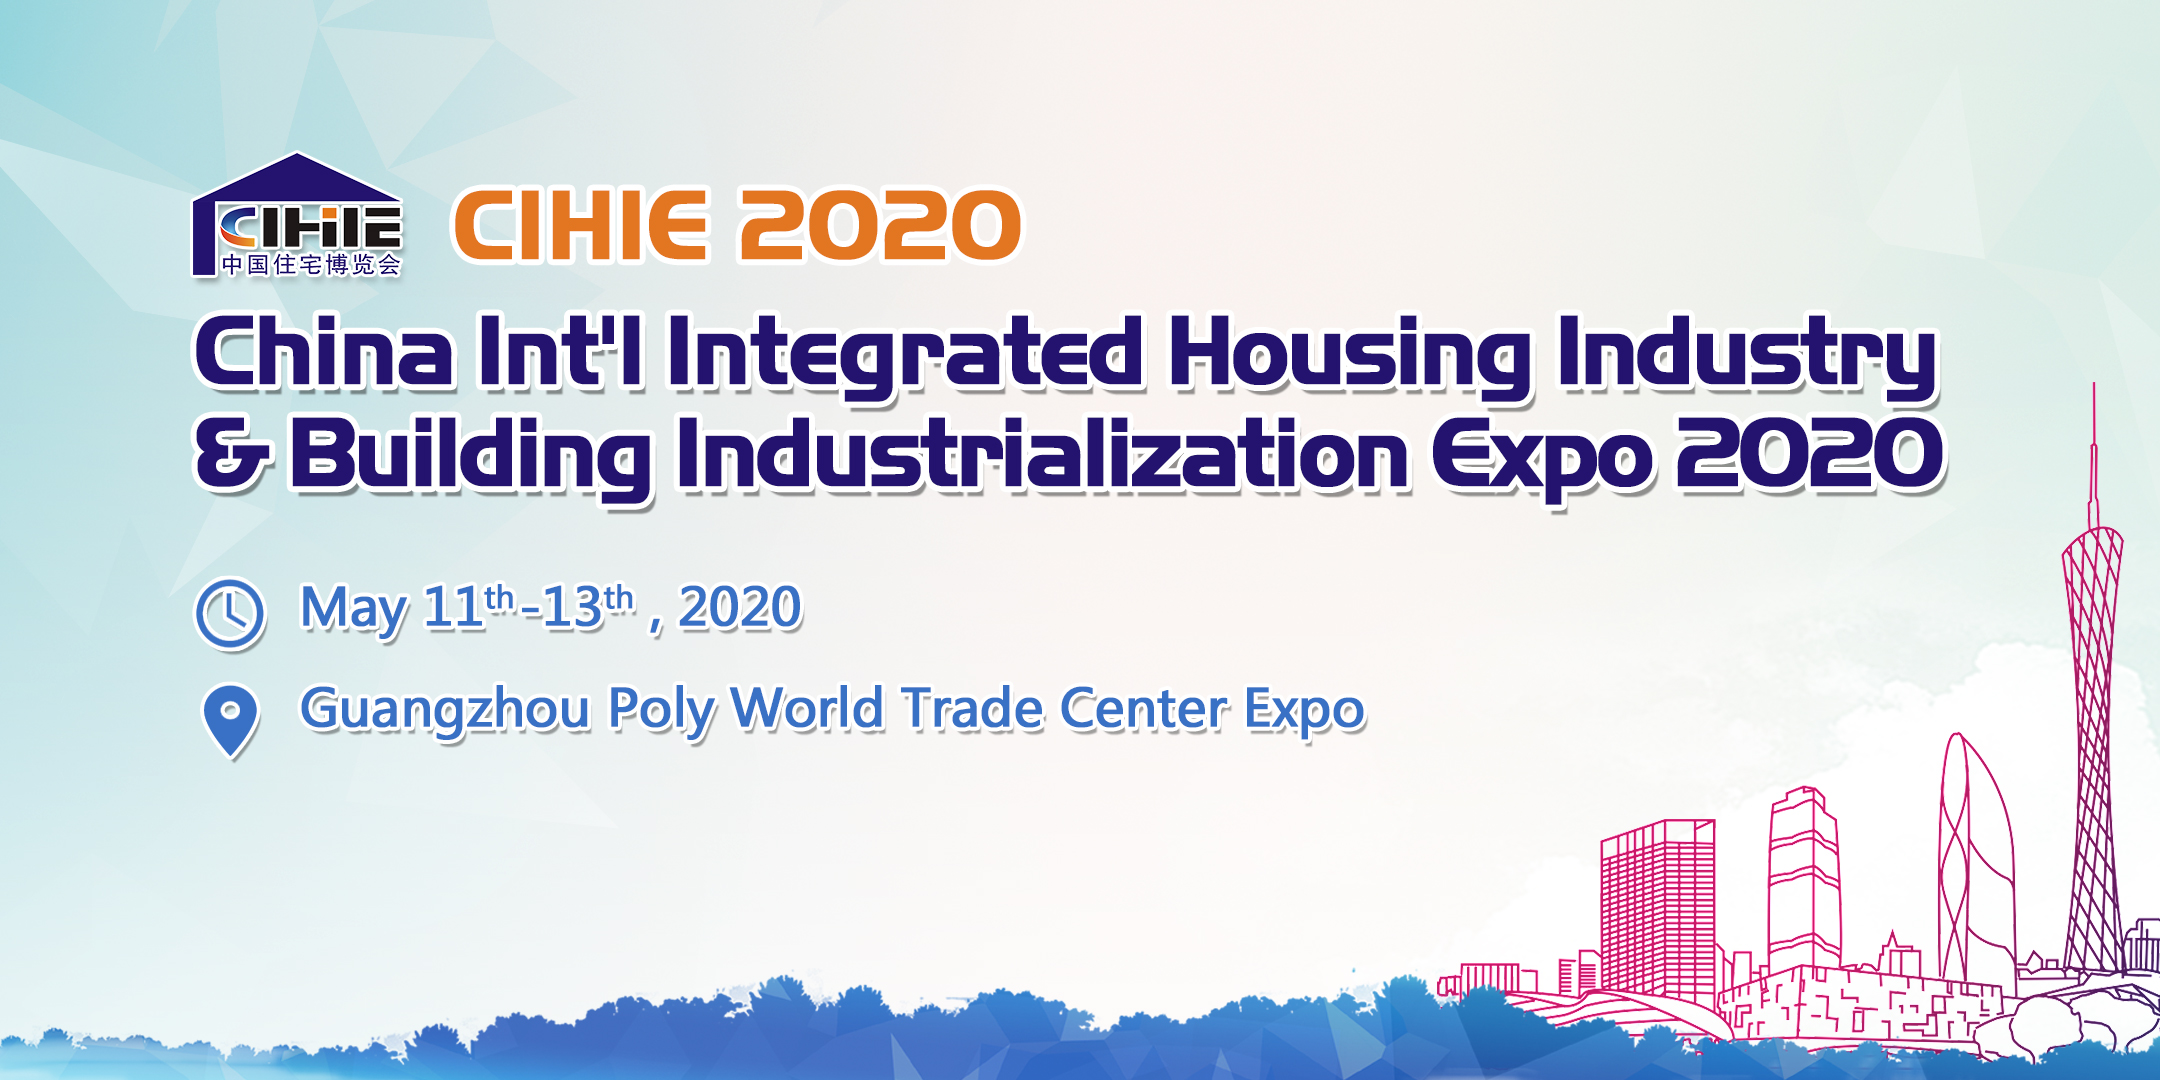 China Int'l Integrated Housing Industry & Building Industrialization Expo (CIHIE 2020), Guangzhou, Guangdong, China